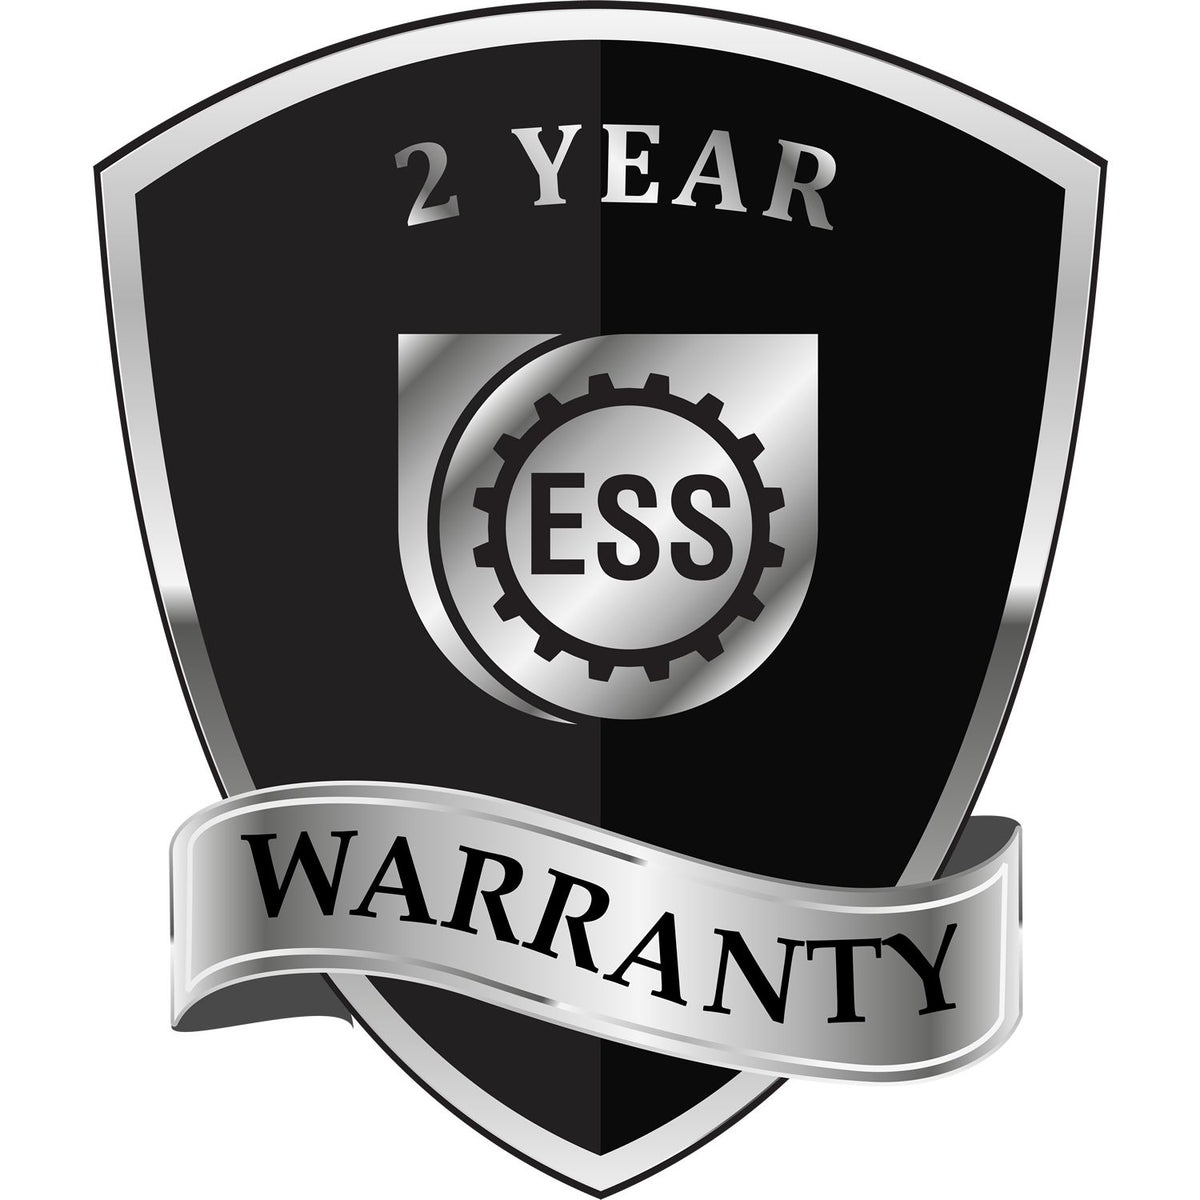 A badge or emblem showing a warranty icon for the Long Reach Nebraska PE Seal